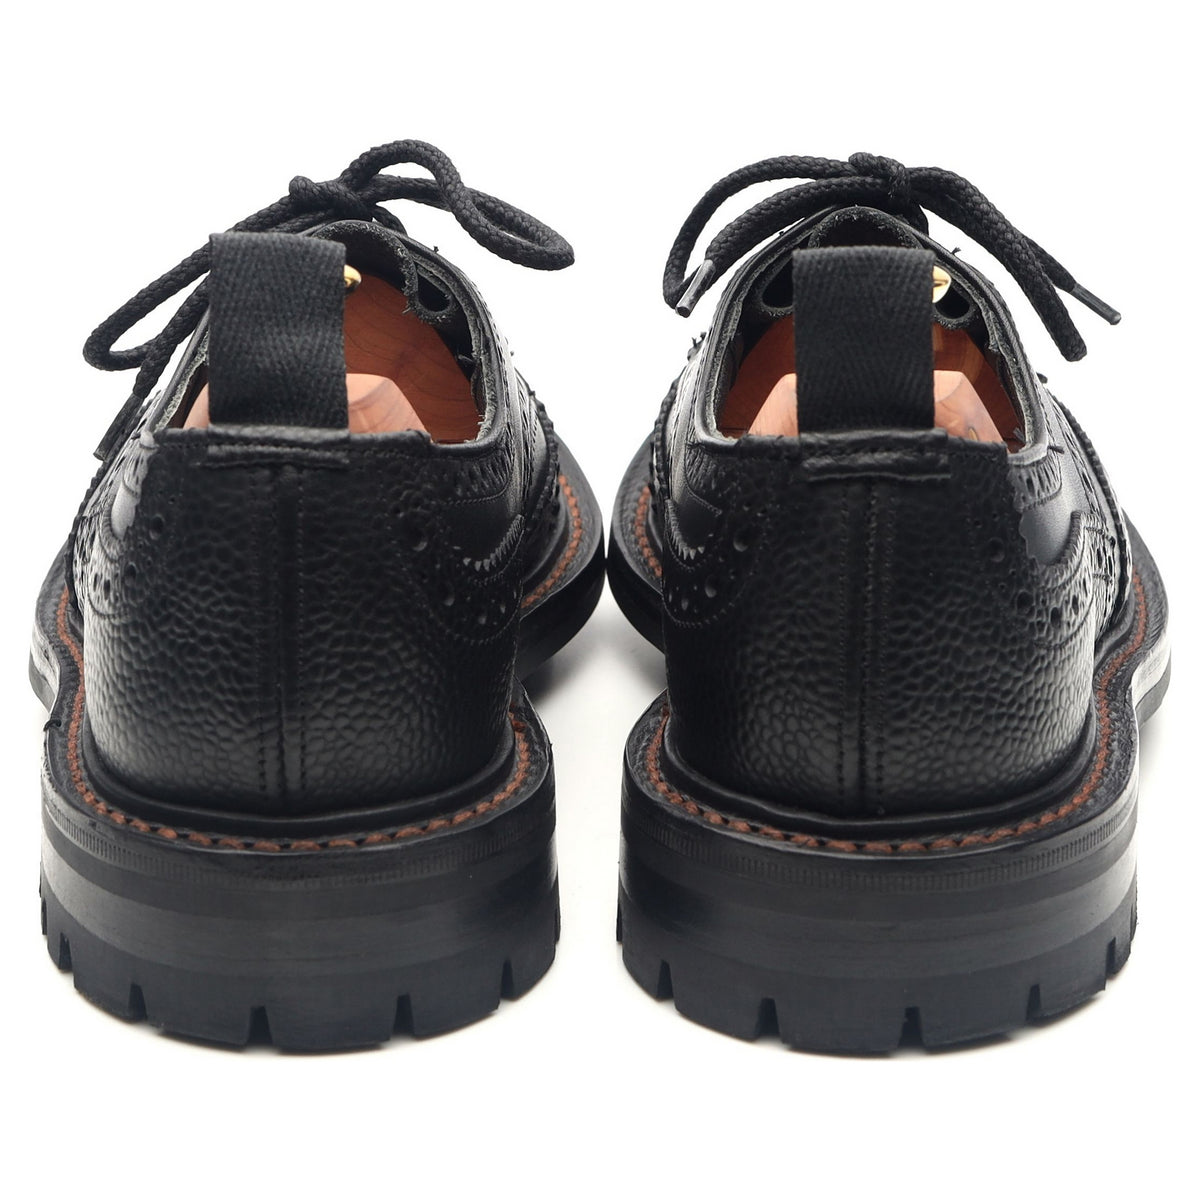 X End Black Leather Derby Brogues UK 6